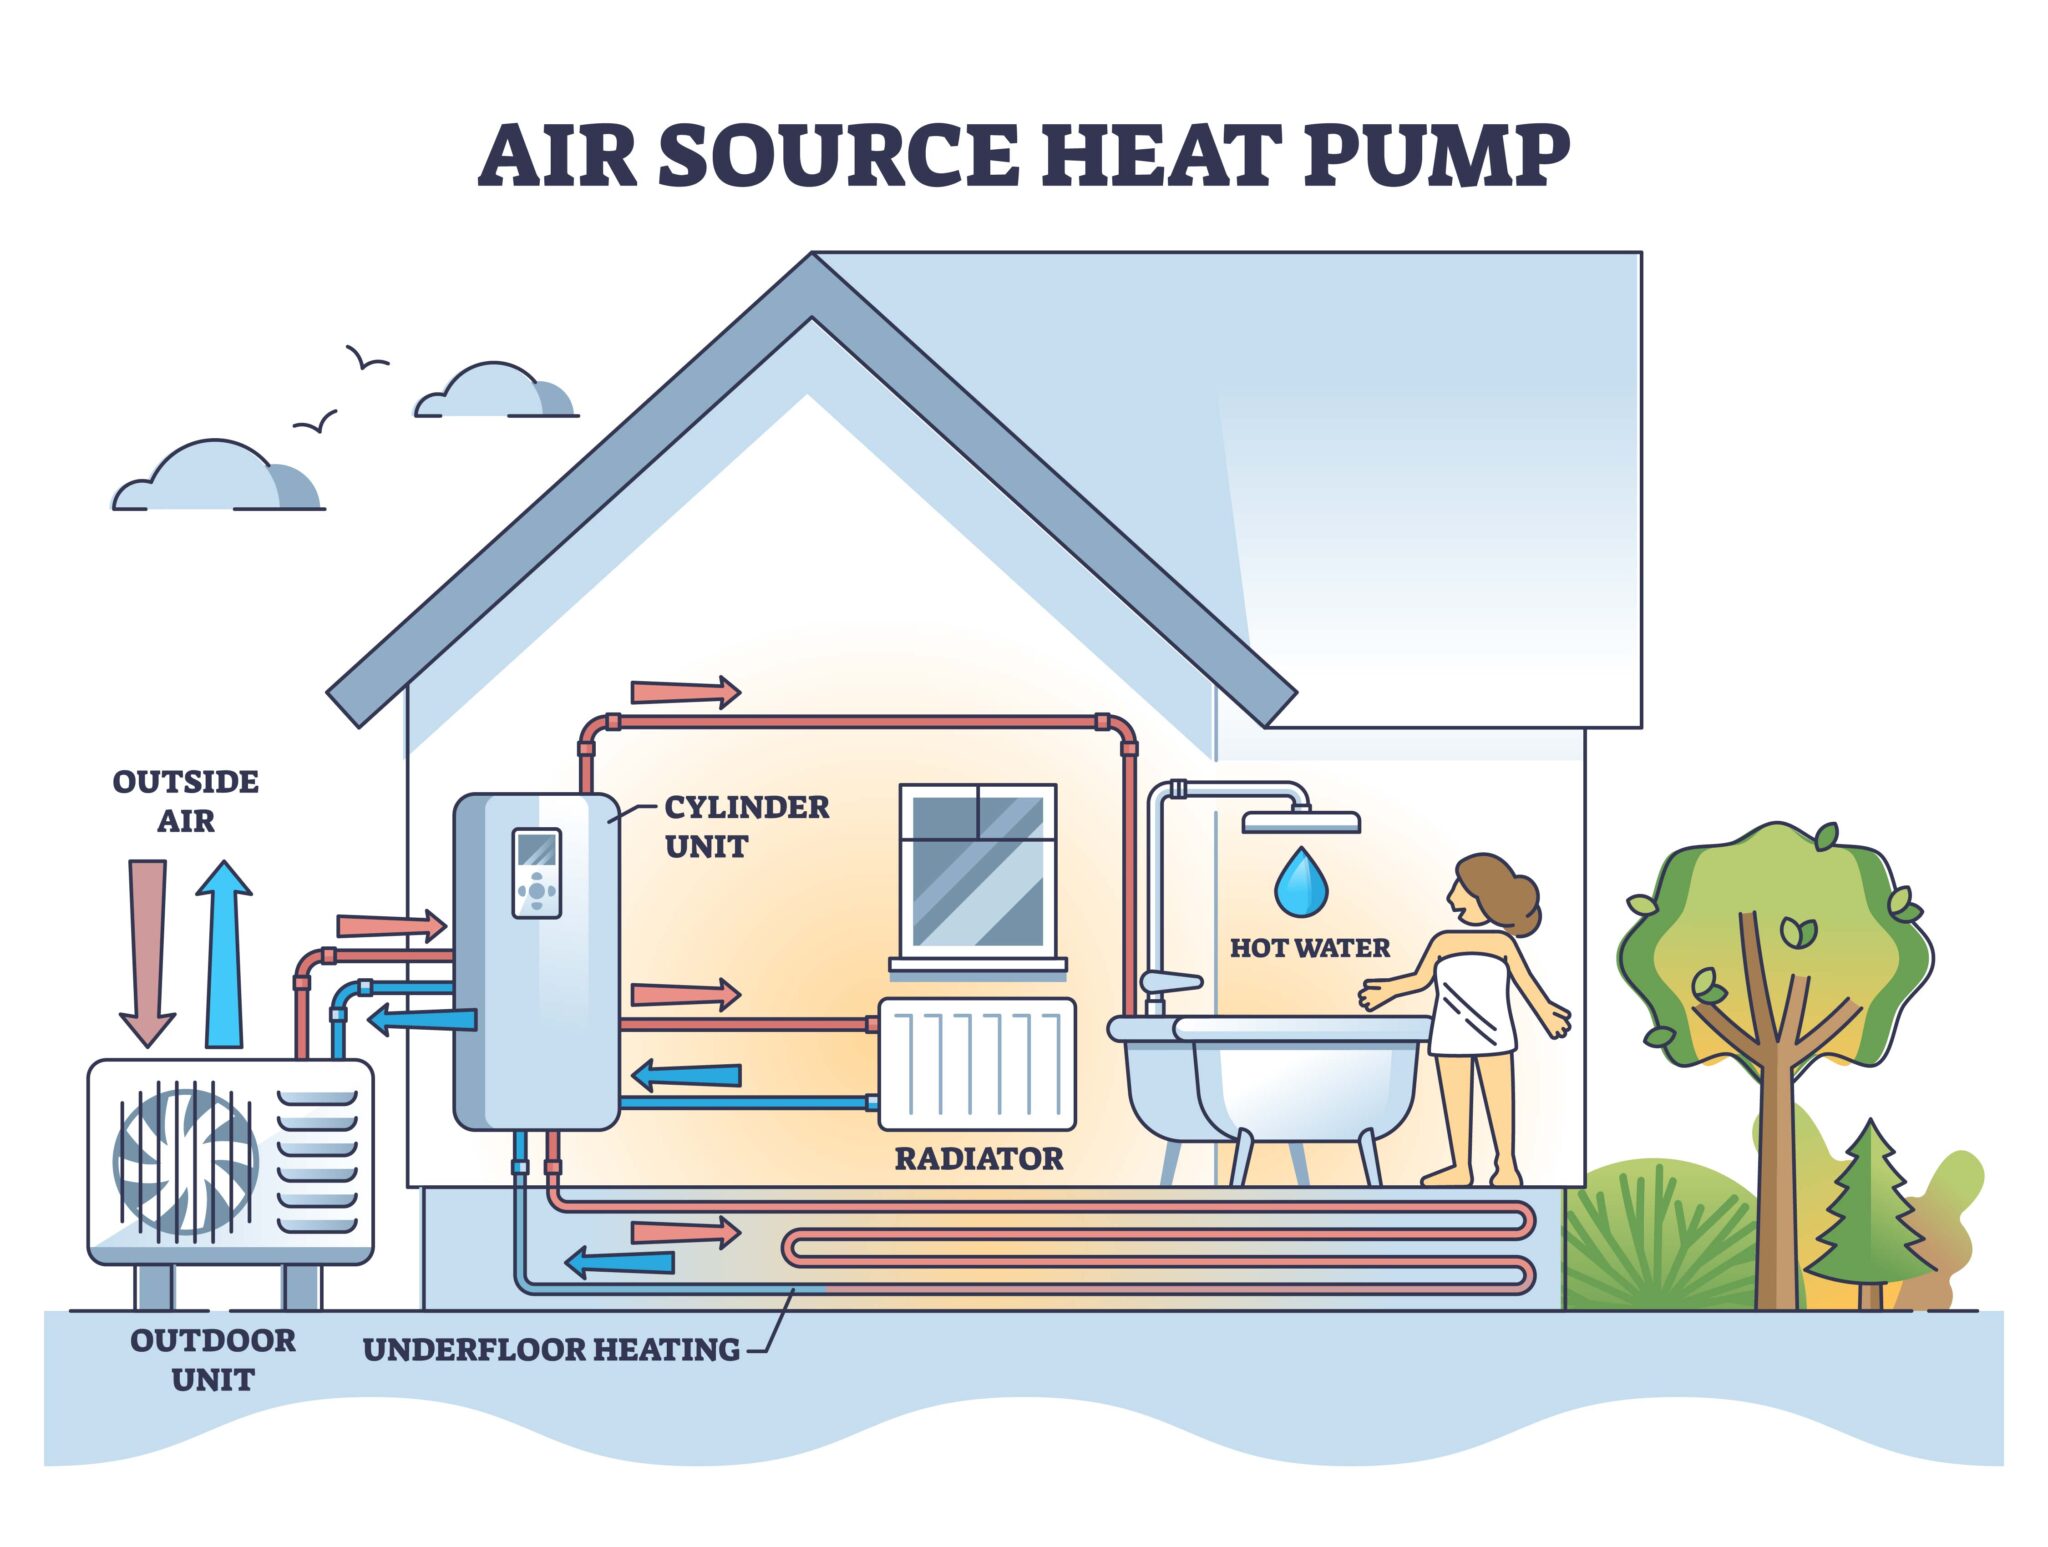 Graphic showing how air Source heat pumps work